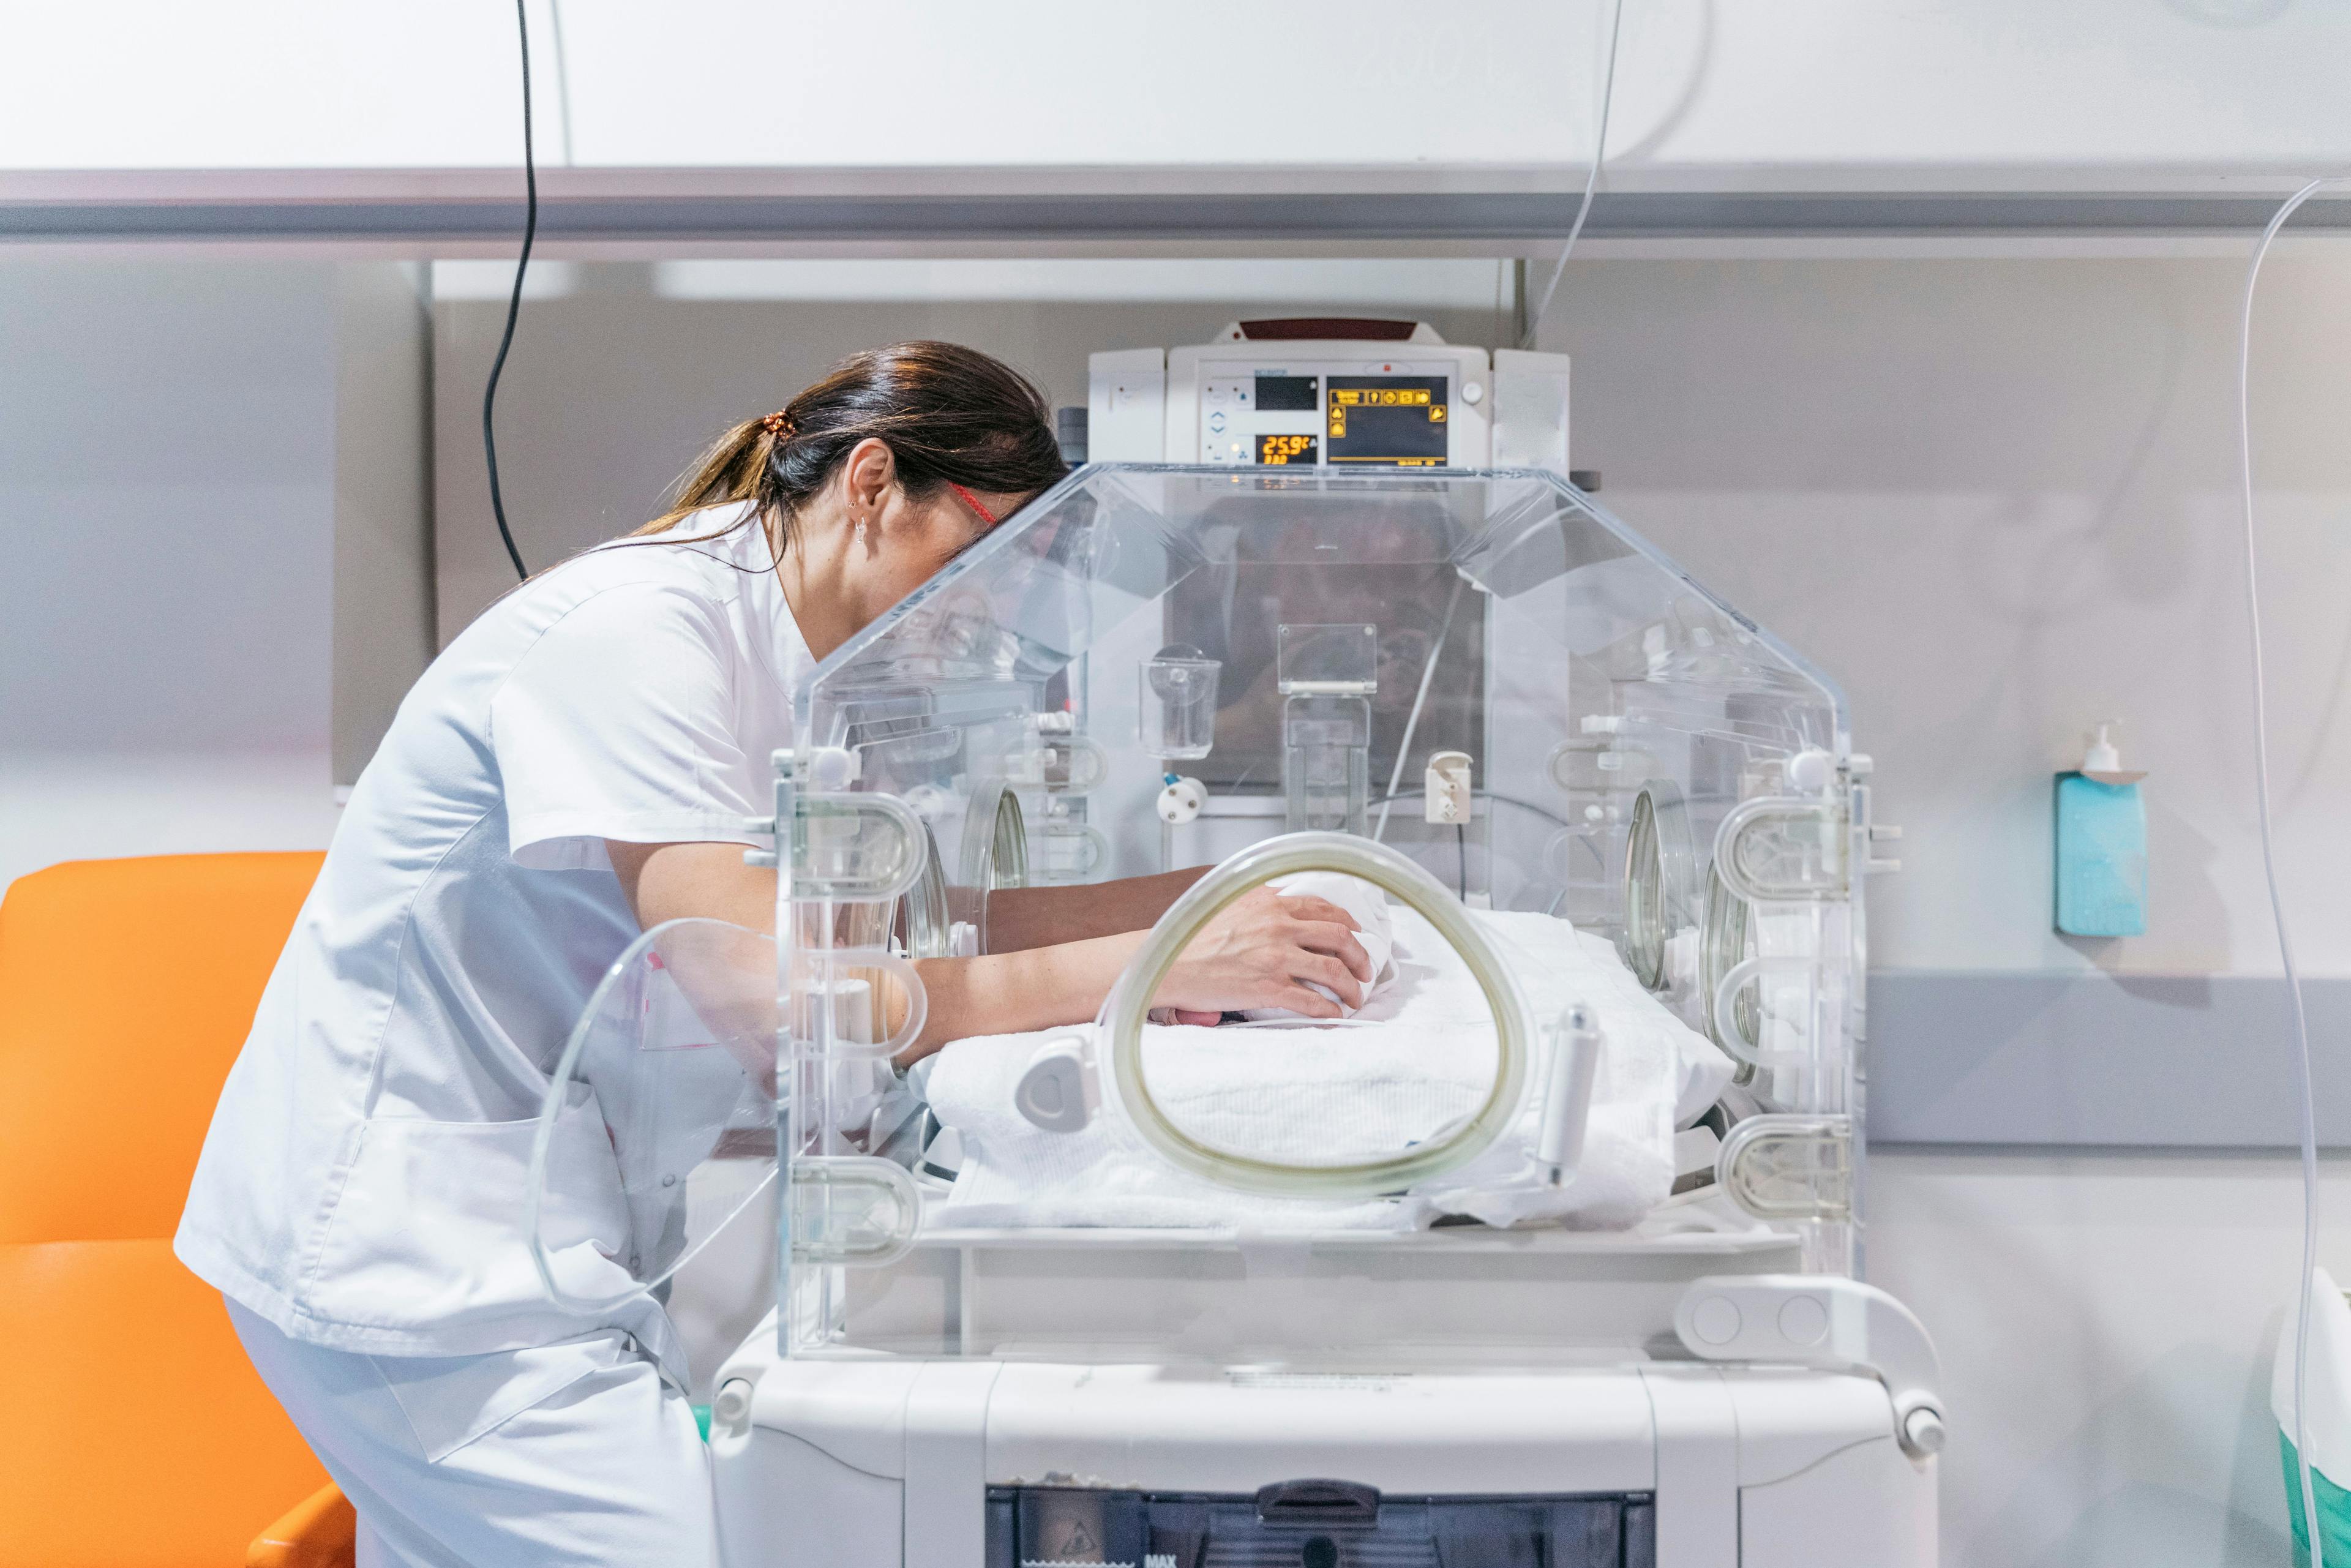 Oxygen for Newborns: When There Is Too Much of a Necessary Thing